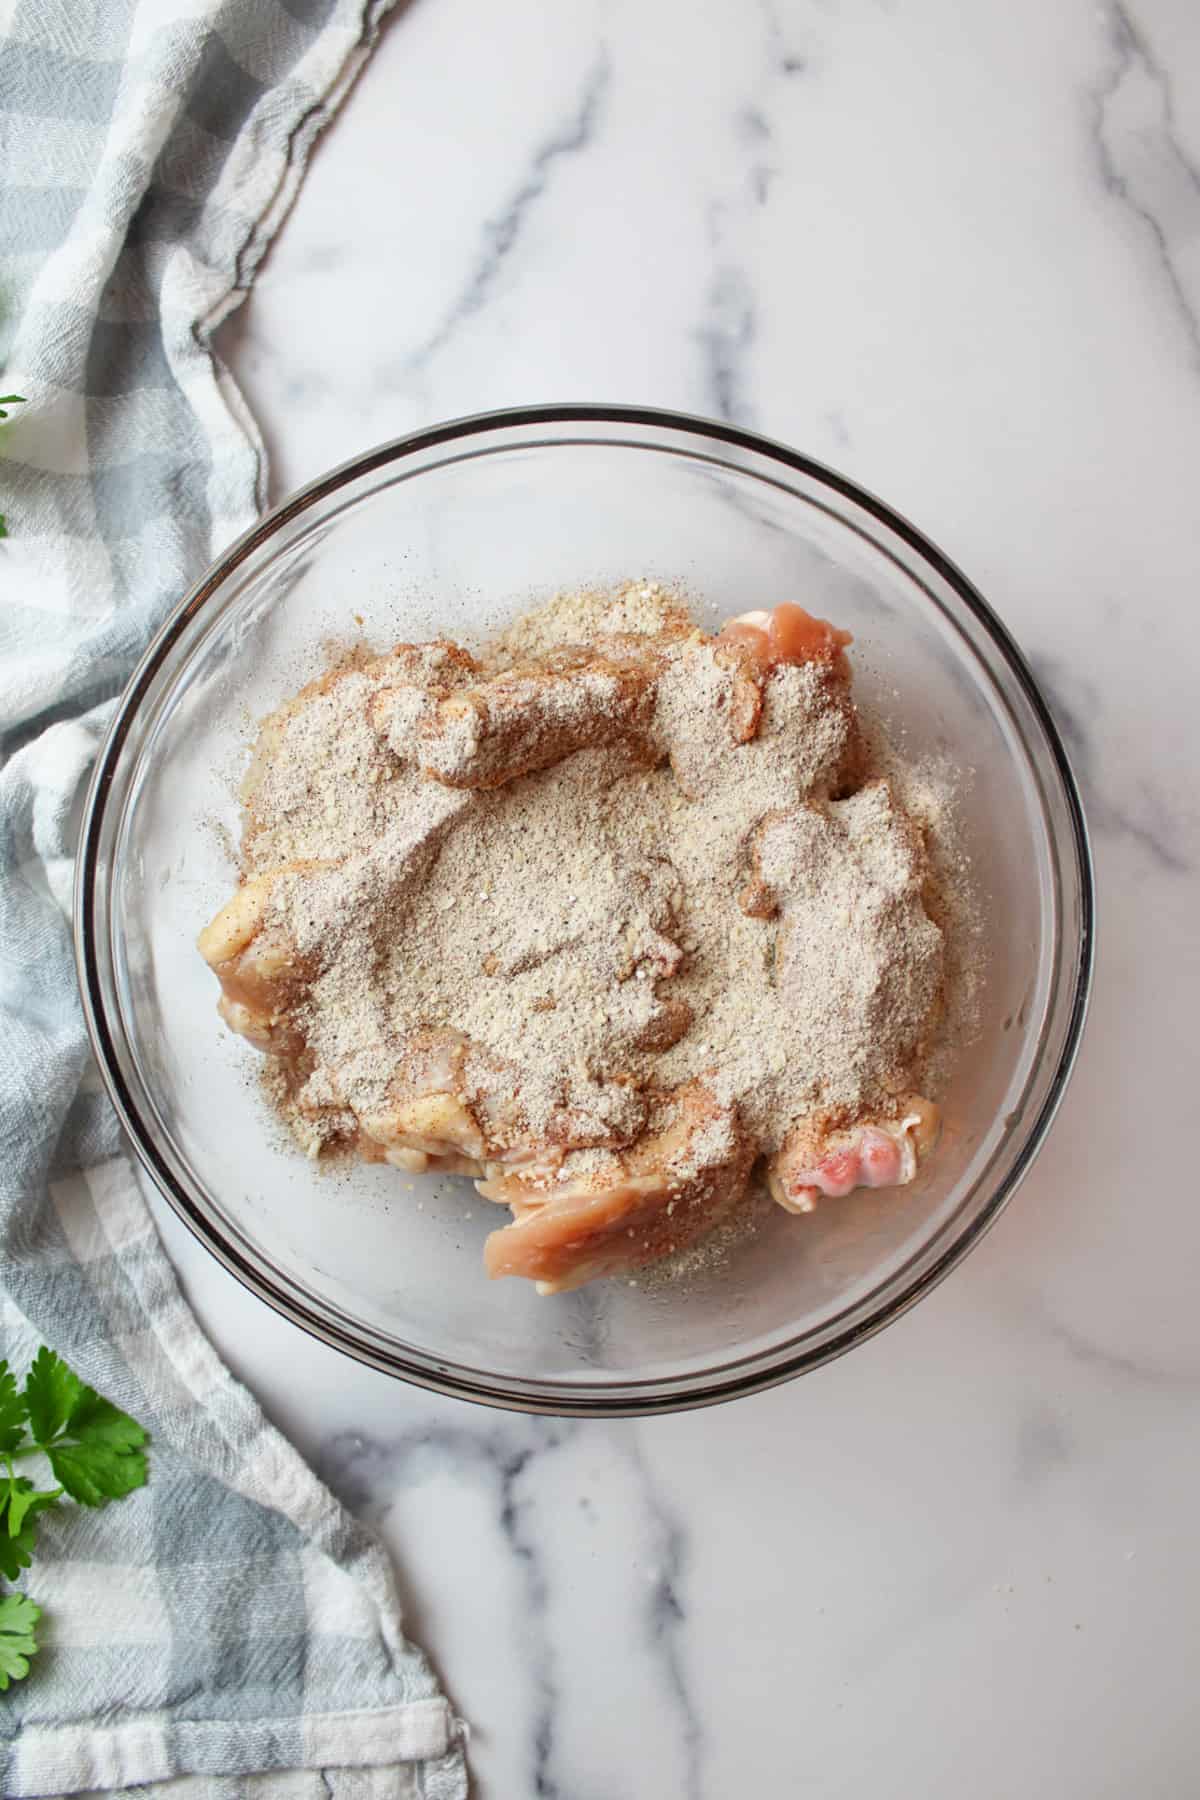 parmesan cheese seasoning mixture over raw chicken wings in a mixing bowl.